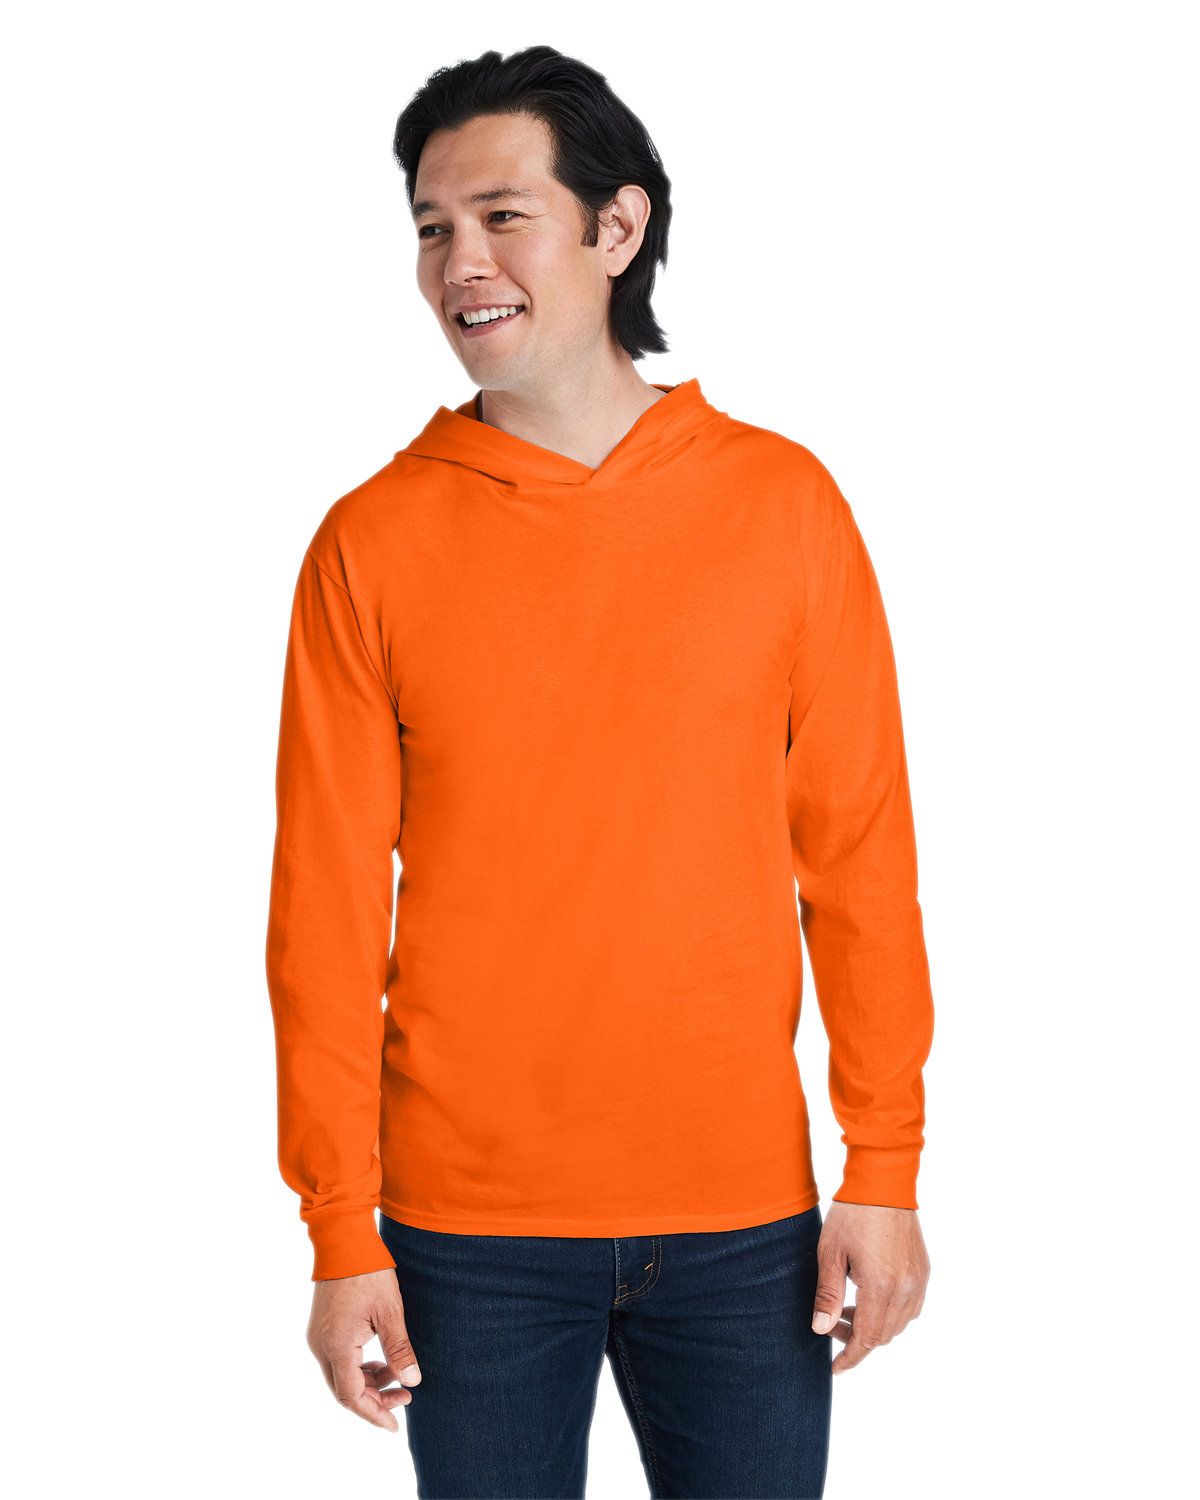 Fruit of the Loom Men's HD Cotton™ Jersey Hooded T-Shirt SAFETY ORANGE 